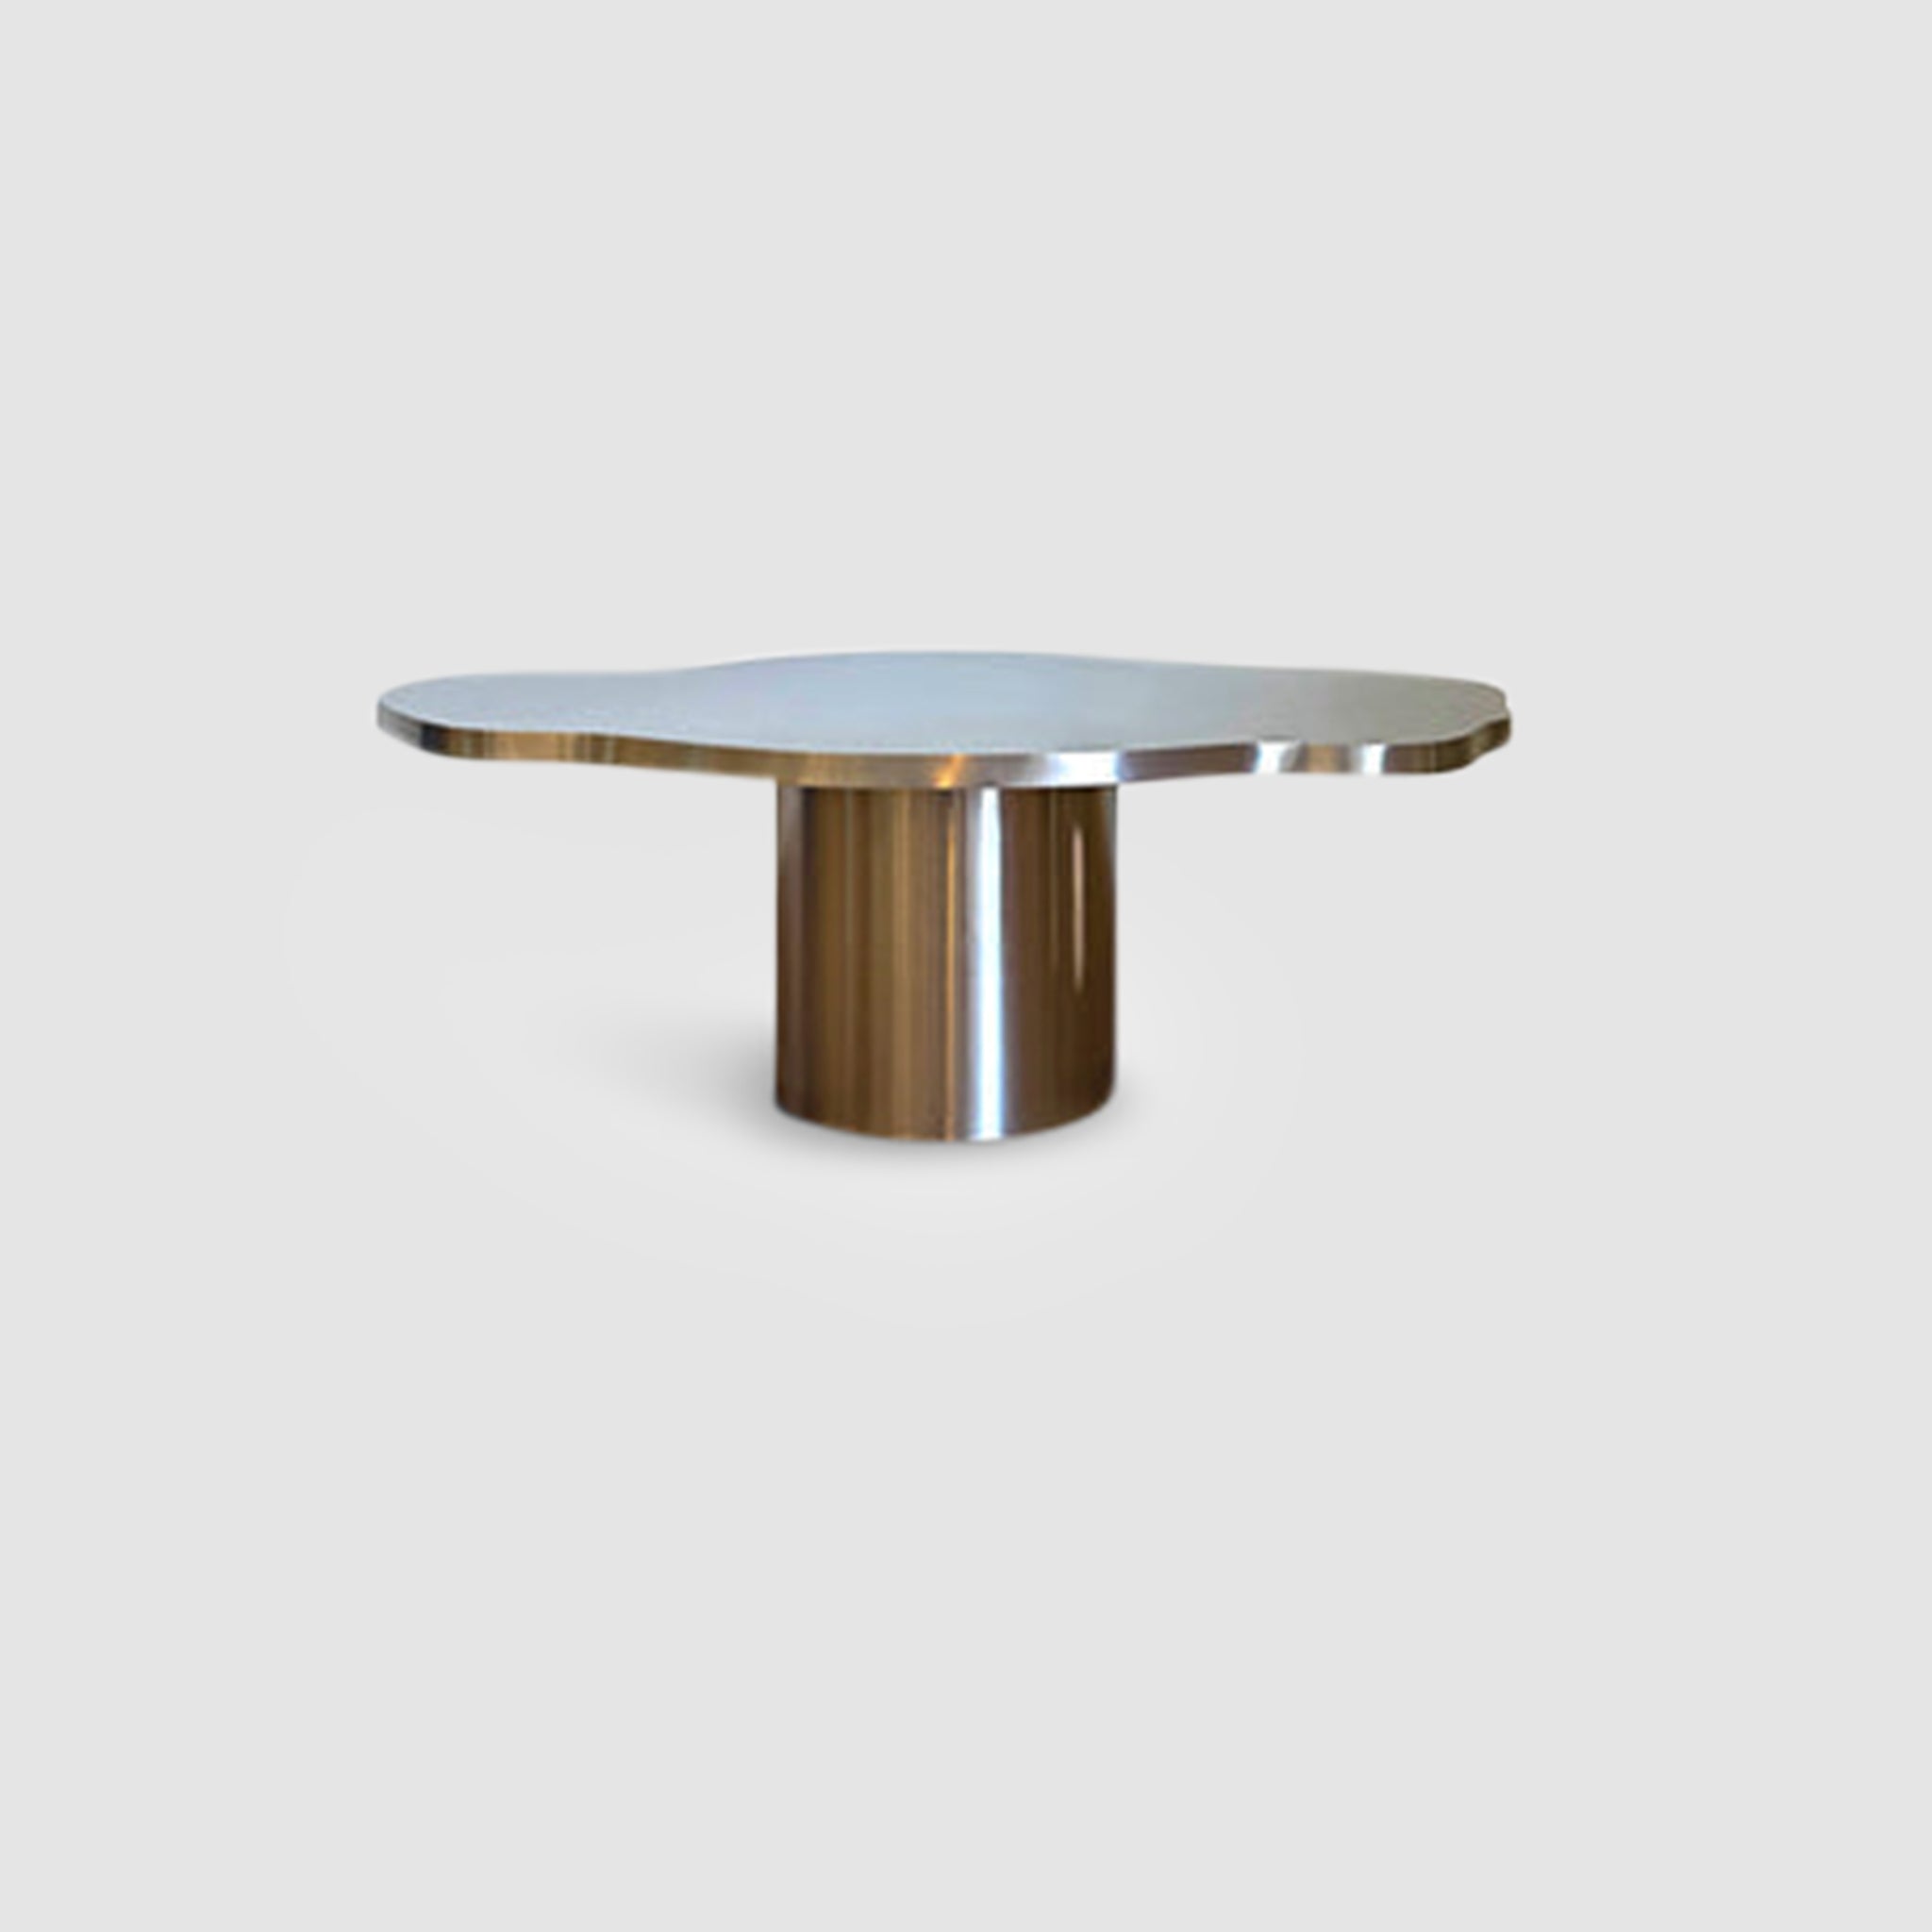 Jamie Coffee Table: Brushed stainless steel table with a modern, minimalist design. 